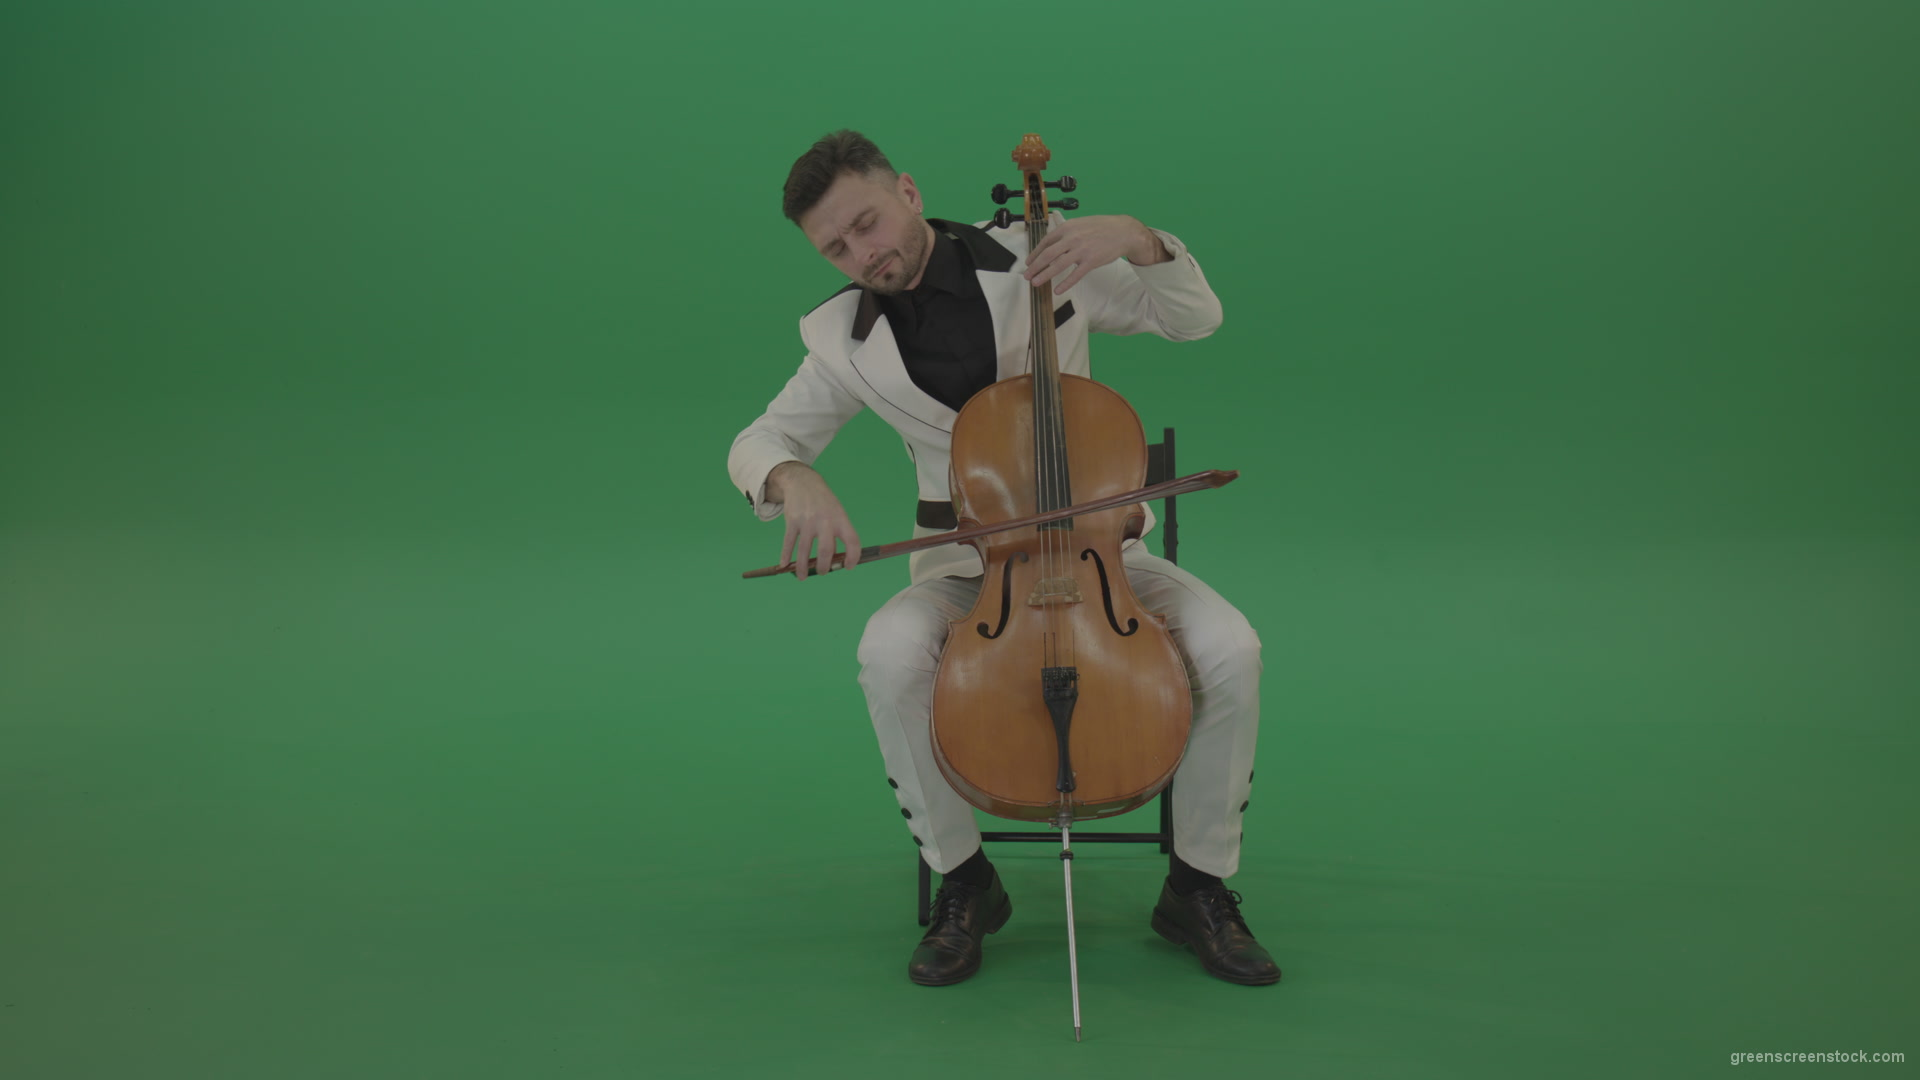 Classic-orchestra-man-in-white-wear-play-violoncello-cello-strings-music-instrument-isolated-on-green-screen_005 Green Screen Stock